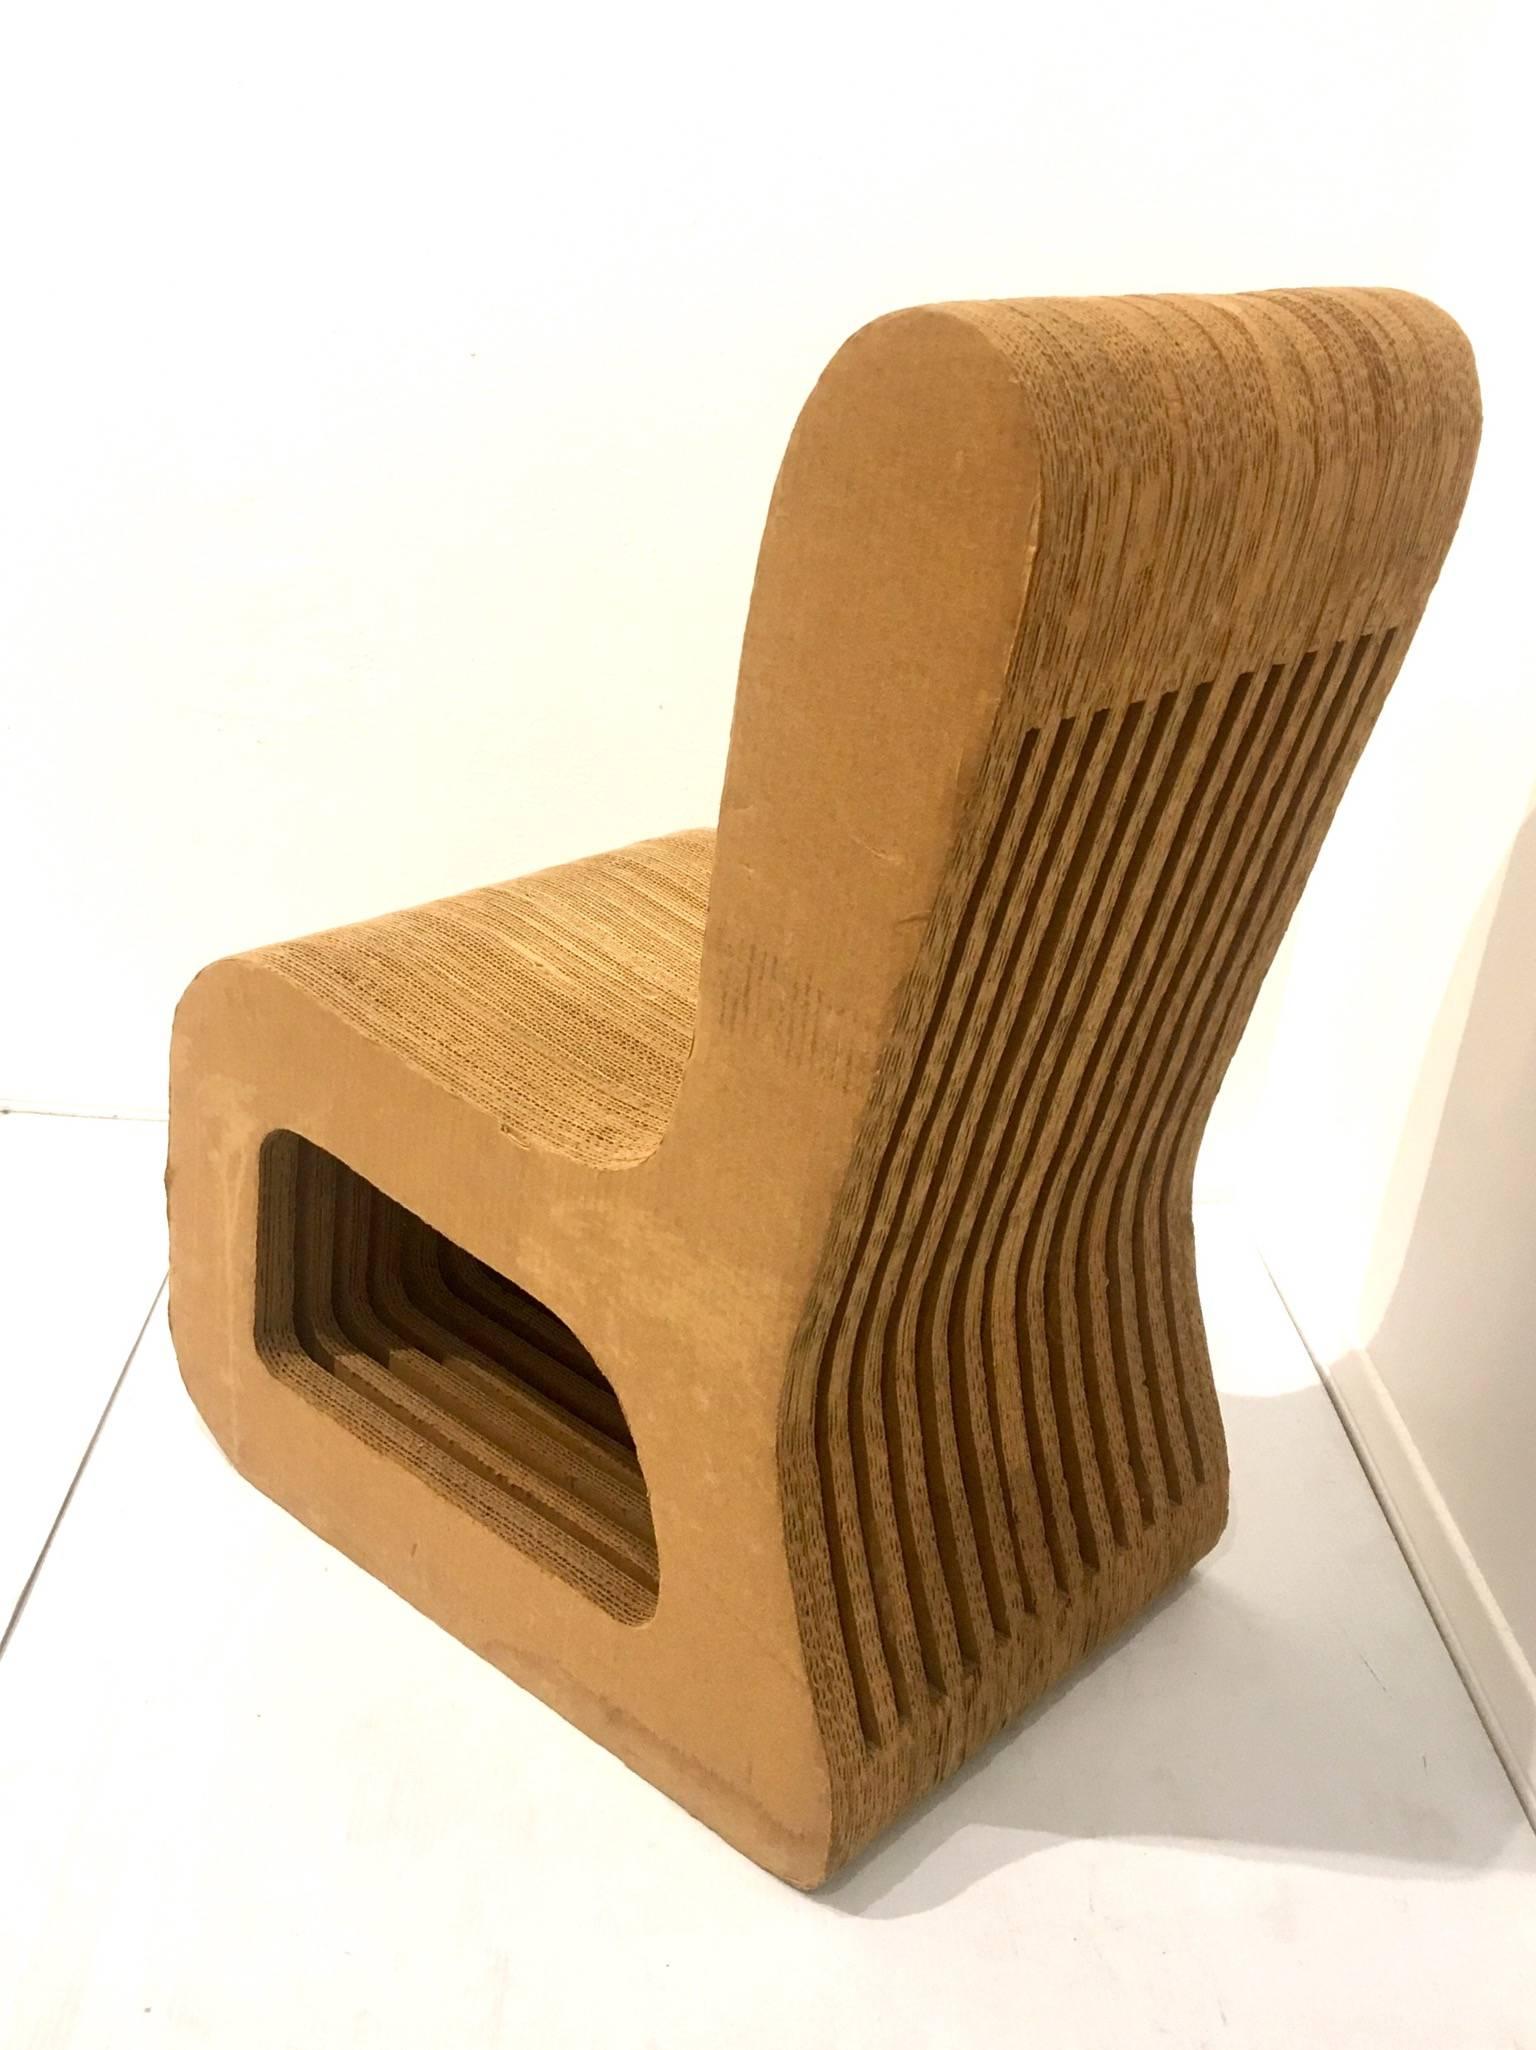 Post-Modern Rare and Unique Chair in Cardboard Attributed to Frank Ghery